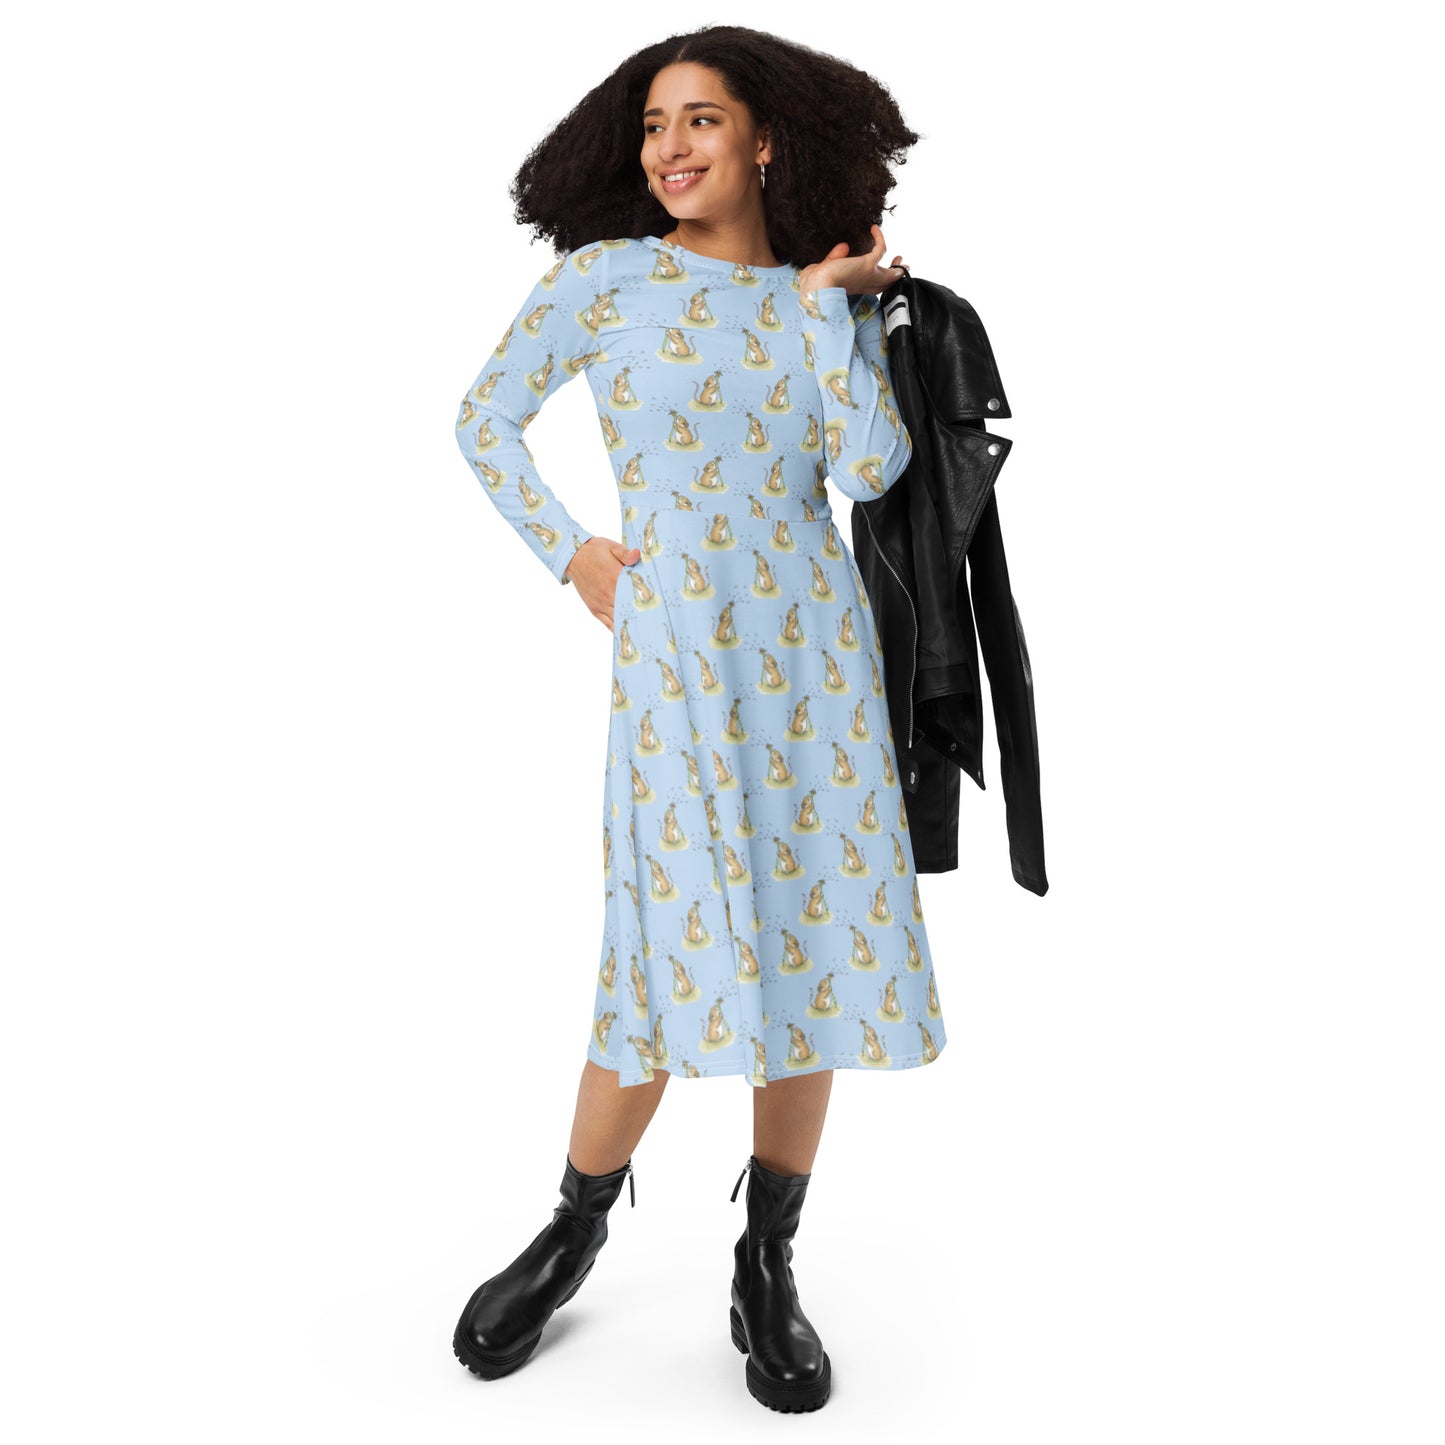 Dandelion Wish patterned long sleeve midi dress. Features patterned design of a mouse making a wish on a dandelion fluff against a light blue background. Dress has boat neckline, fitted waist, flared bottom, and side pockets.  Shown on female model with black jacket over her shoulder.